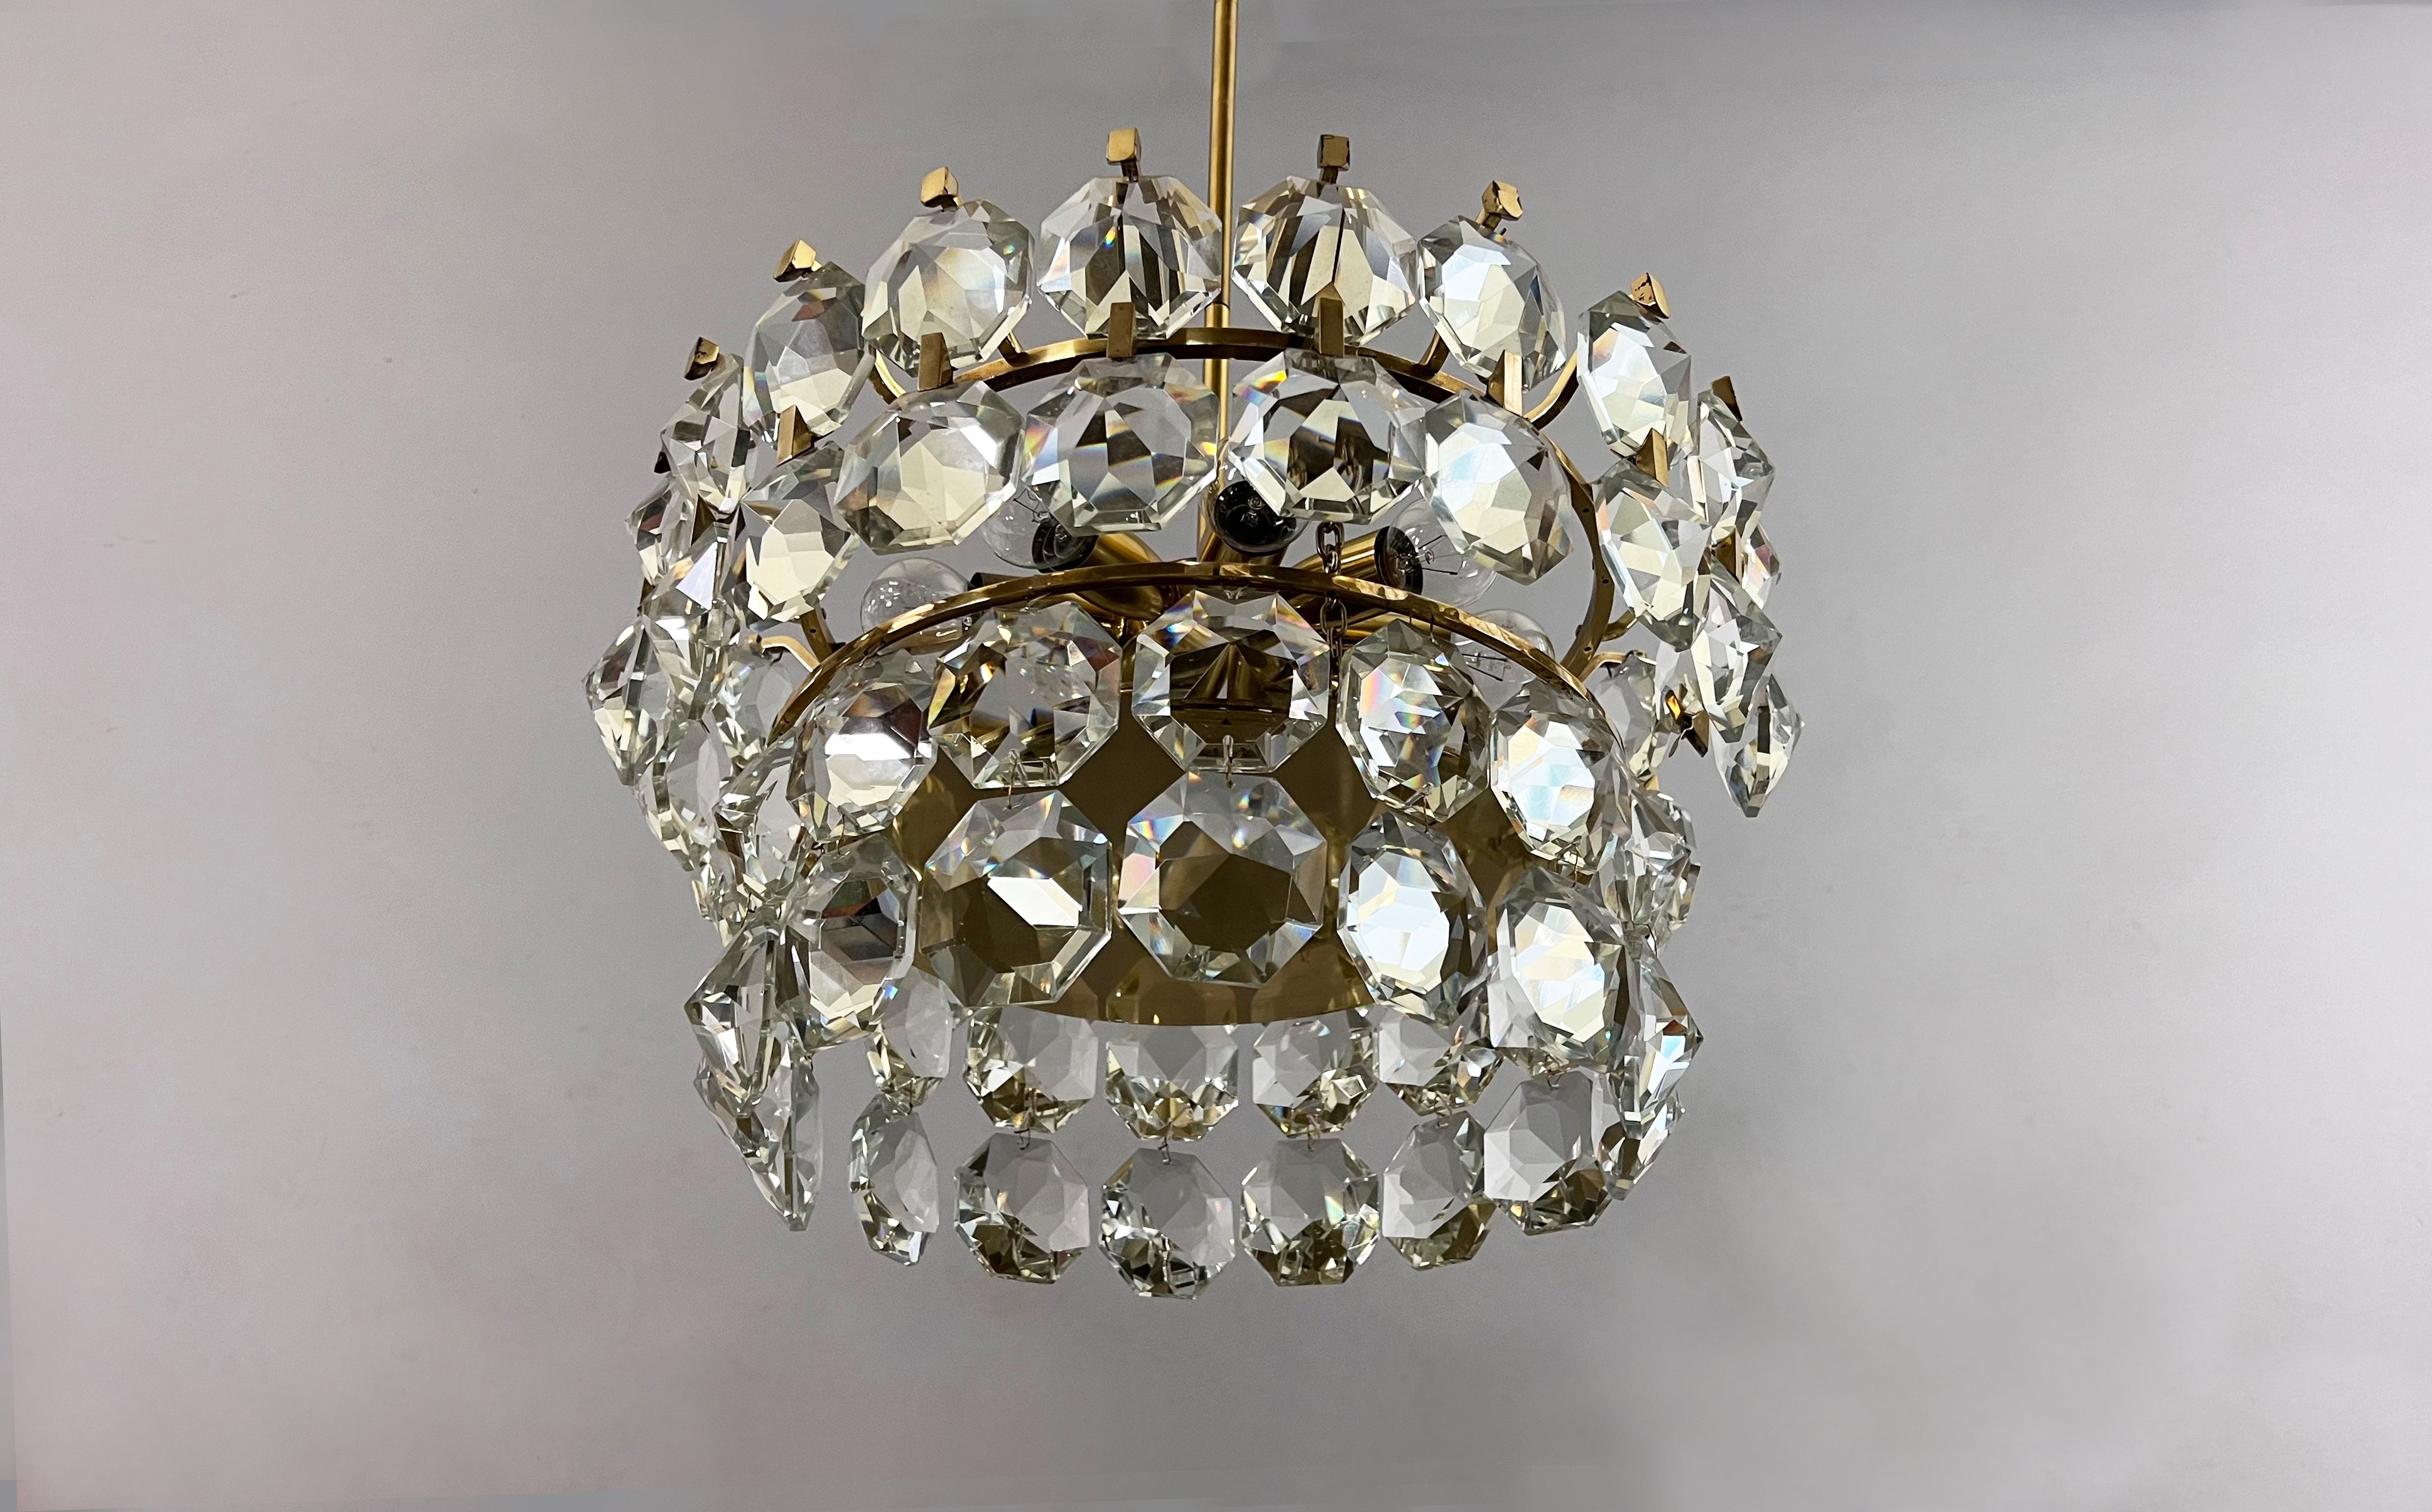 Bakalowits & sons,
Vienna 1960,
hanging lamp,
decorated with hand cut crystal glasses.
9 bulb sockets E14,
the light fixutre is made of a gilded brass frame.
height 80cm, diameter 50cm